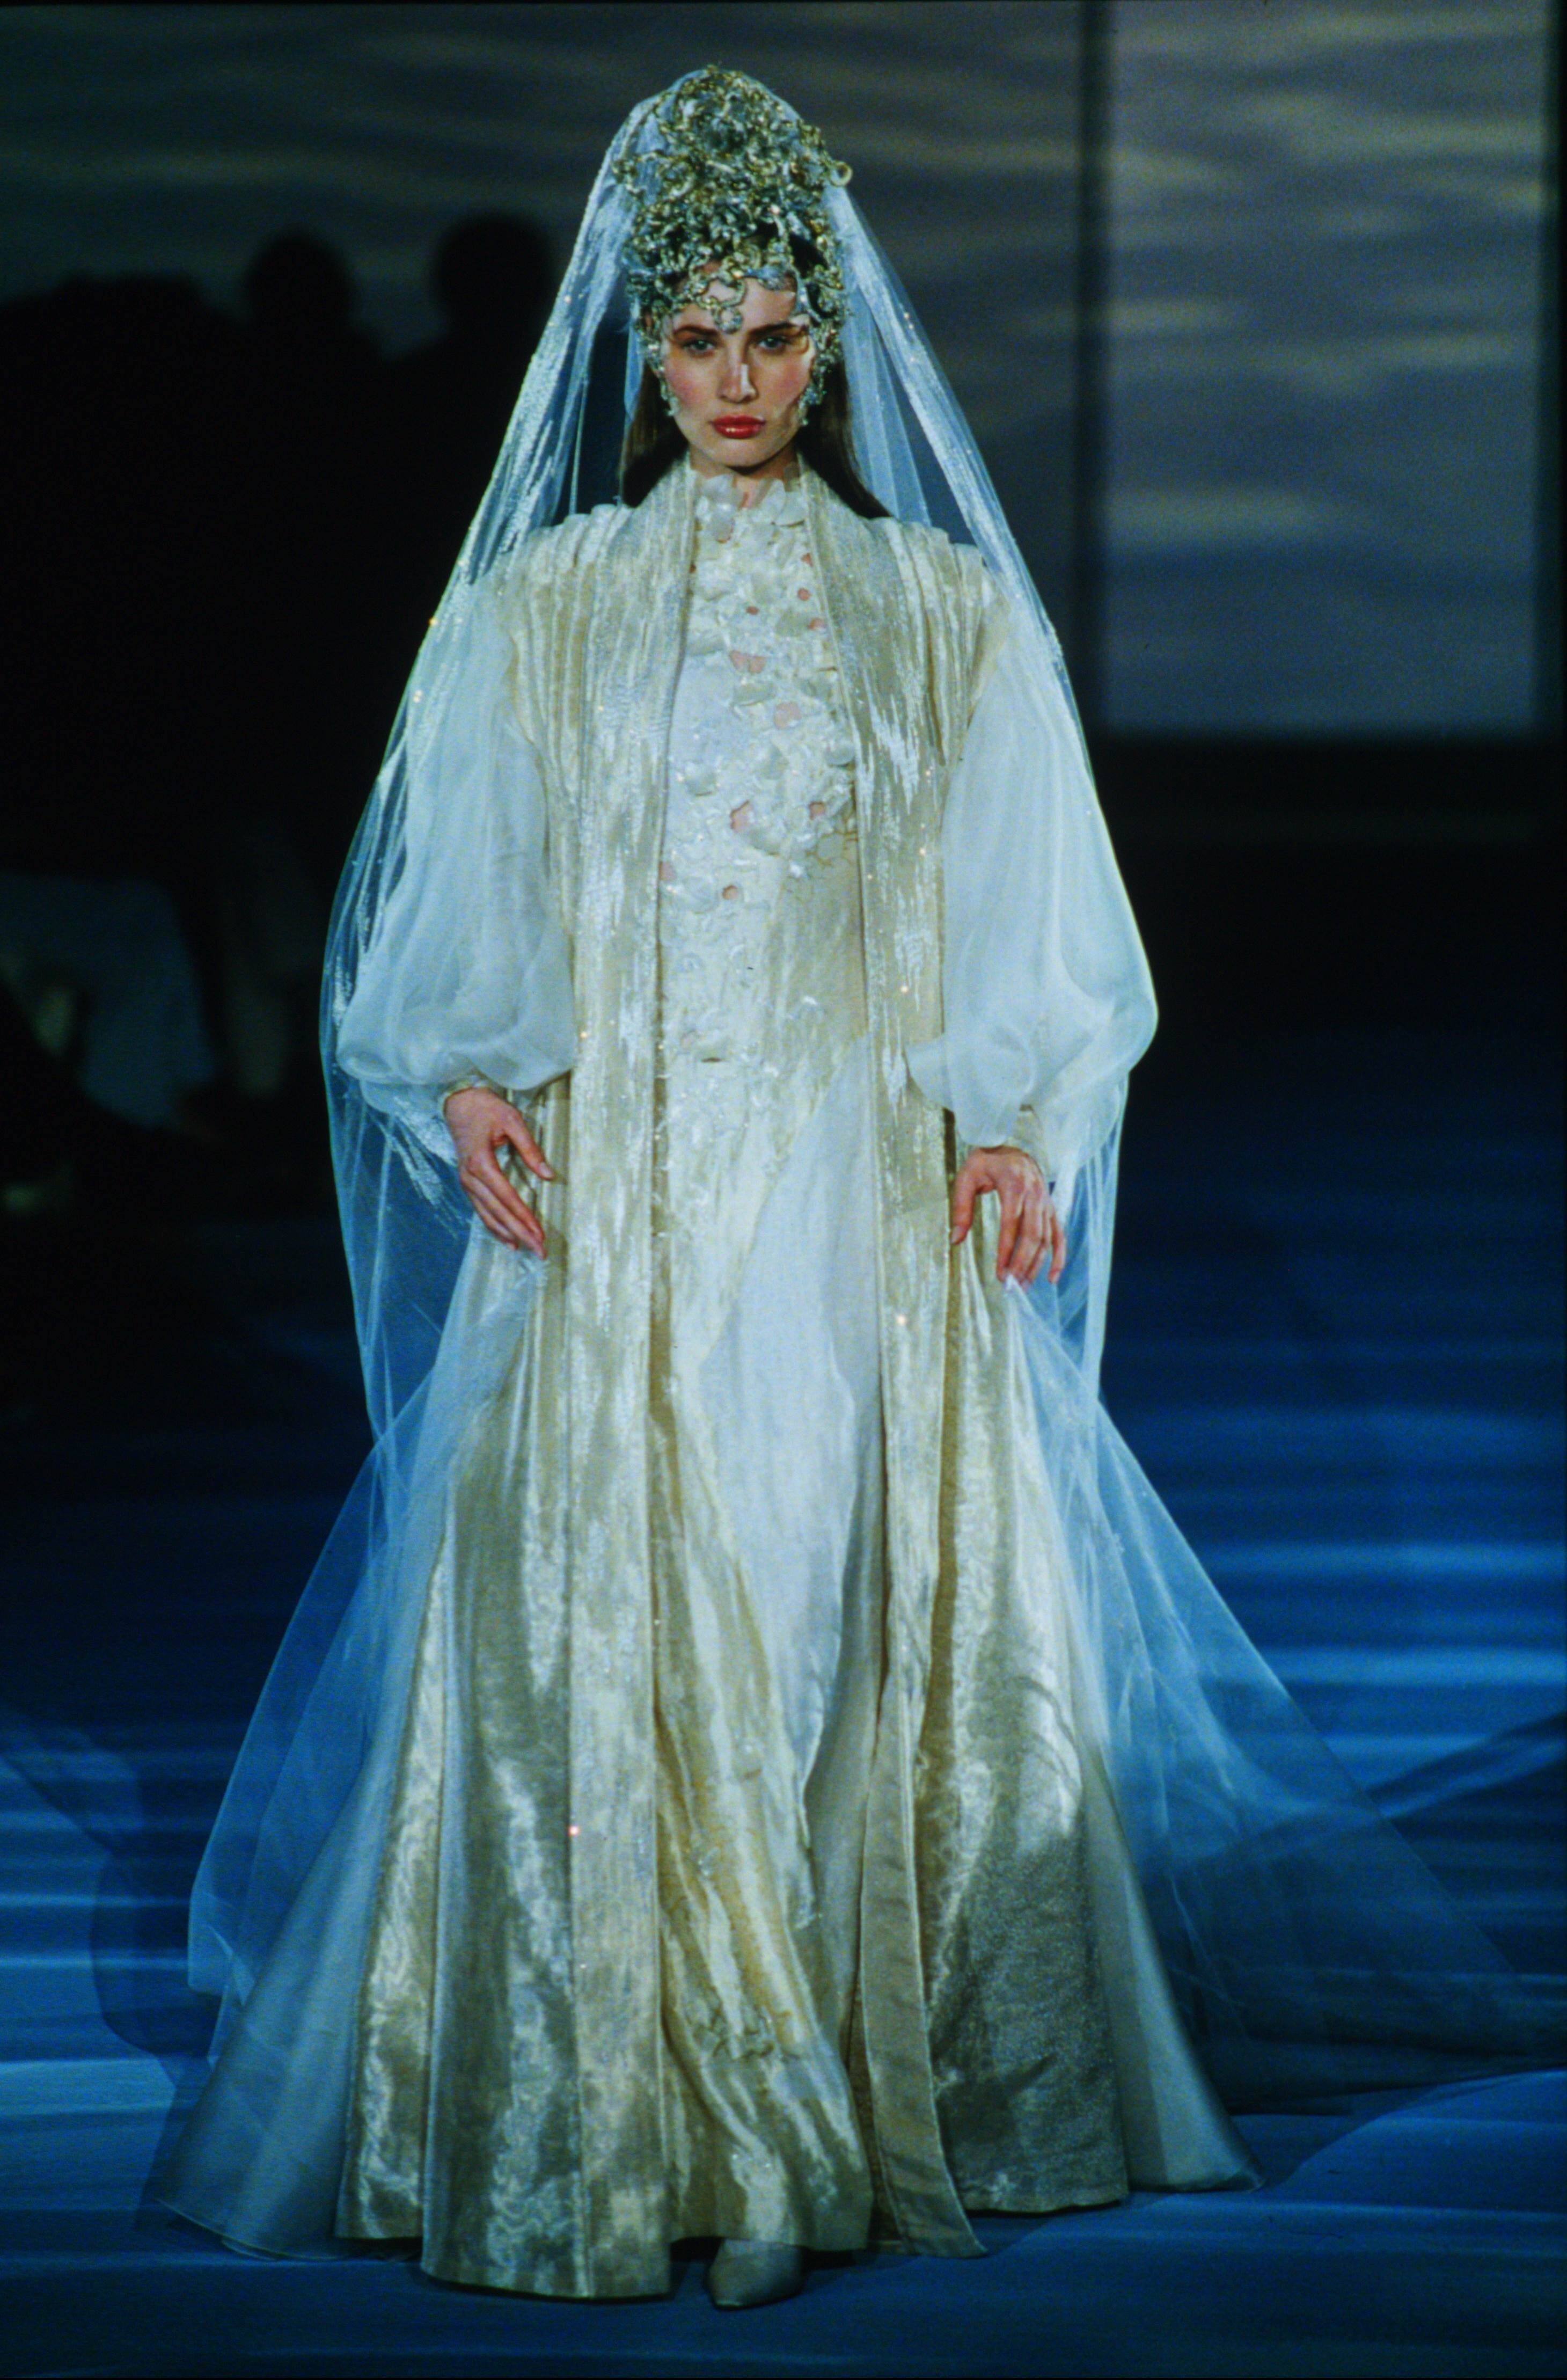 A model walks in the Louis Feraud Spring 1999 Couture Runway Show